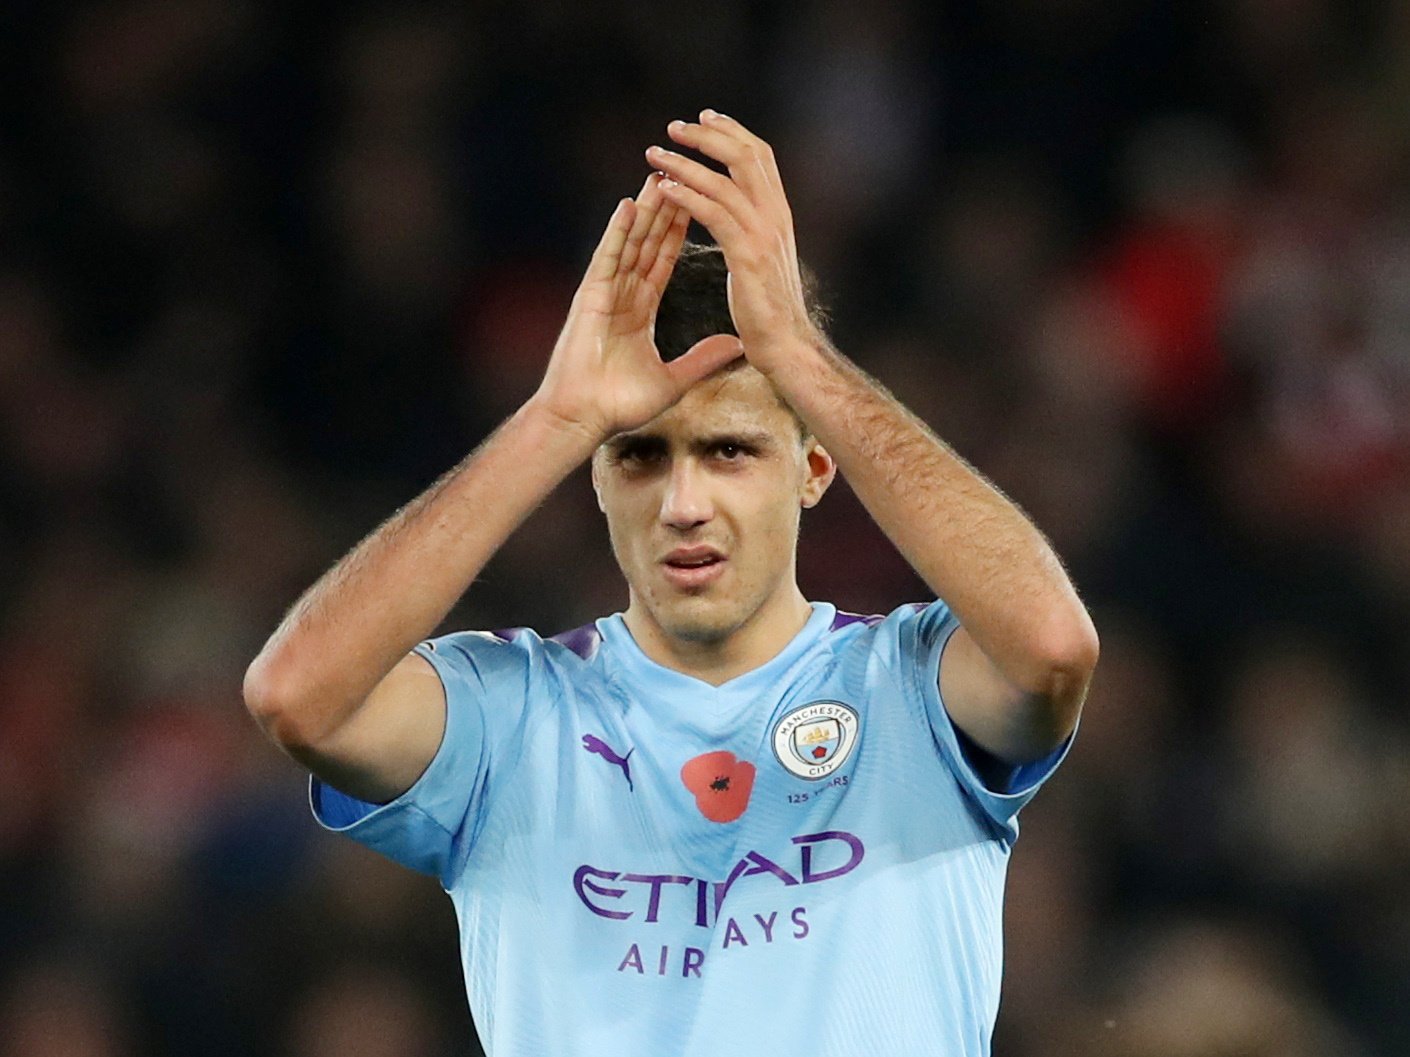 Manchester City's Attack Is Their Weakest Point This Season - Rodri